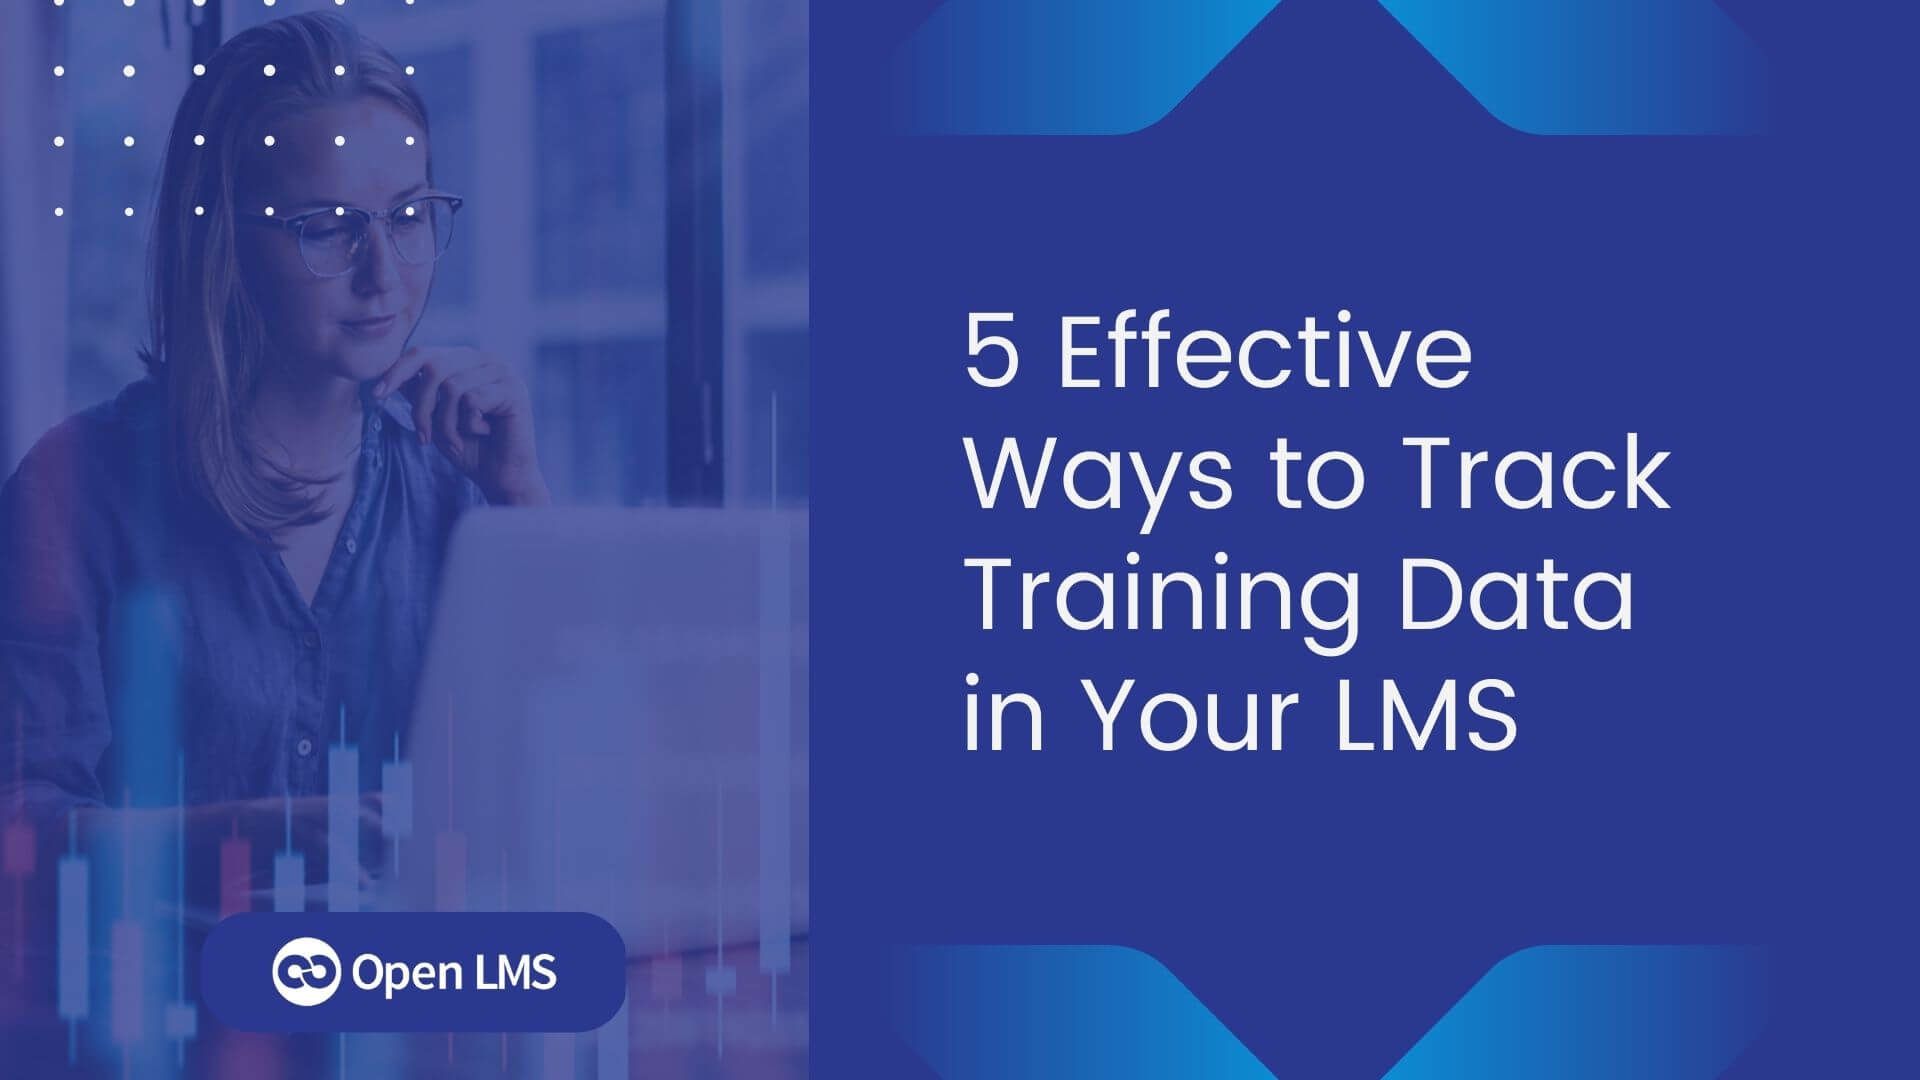 5 Effective Ways to Track Training Data in Your LMS